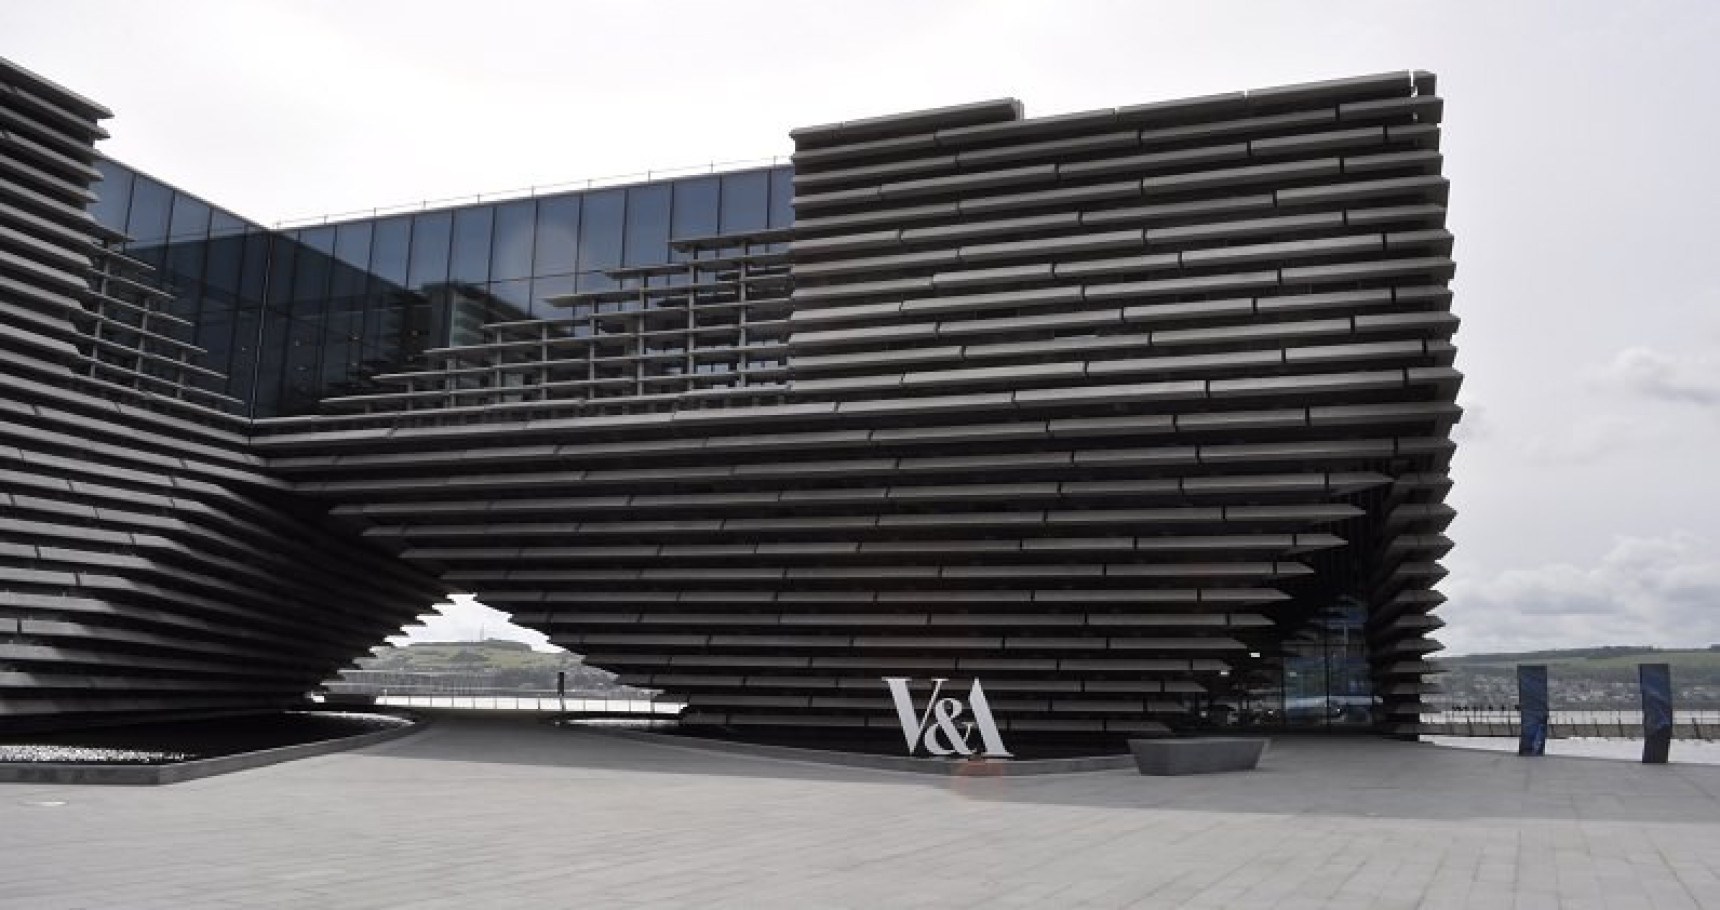 V&A Dundee. Image Credit: Dundee Waterfront